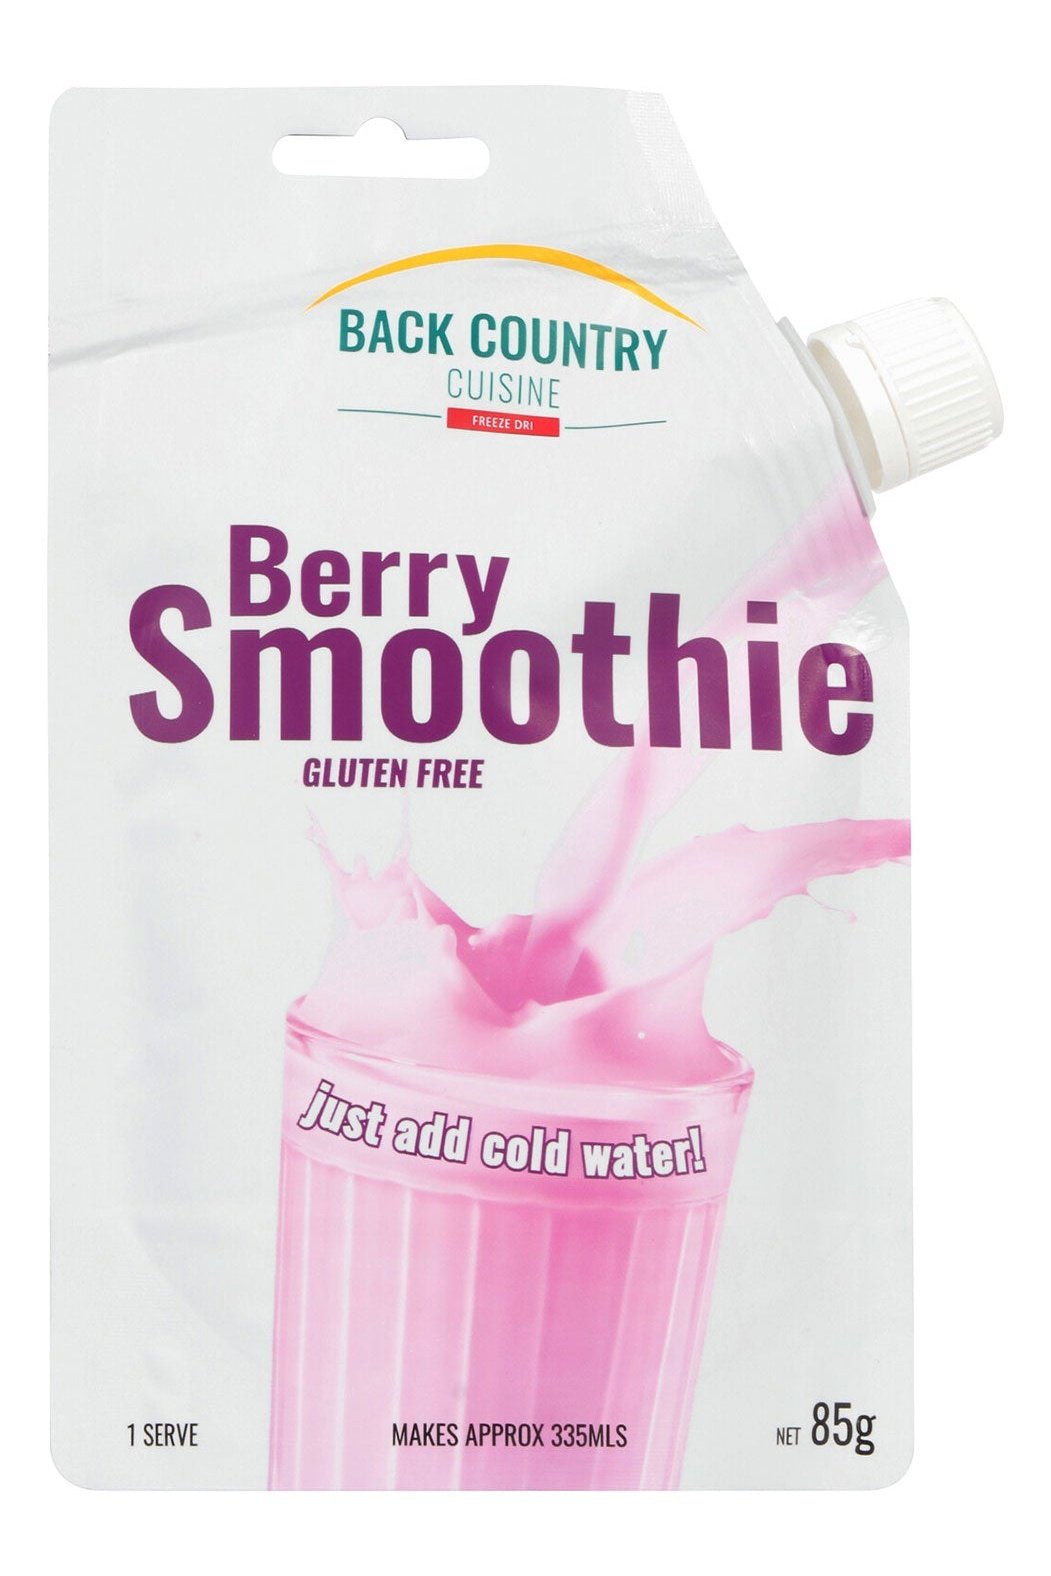 Back Country Cuisine - Berry Smoothie Back Country Cuisine Rugged Ram Outdoors